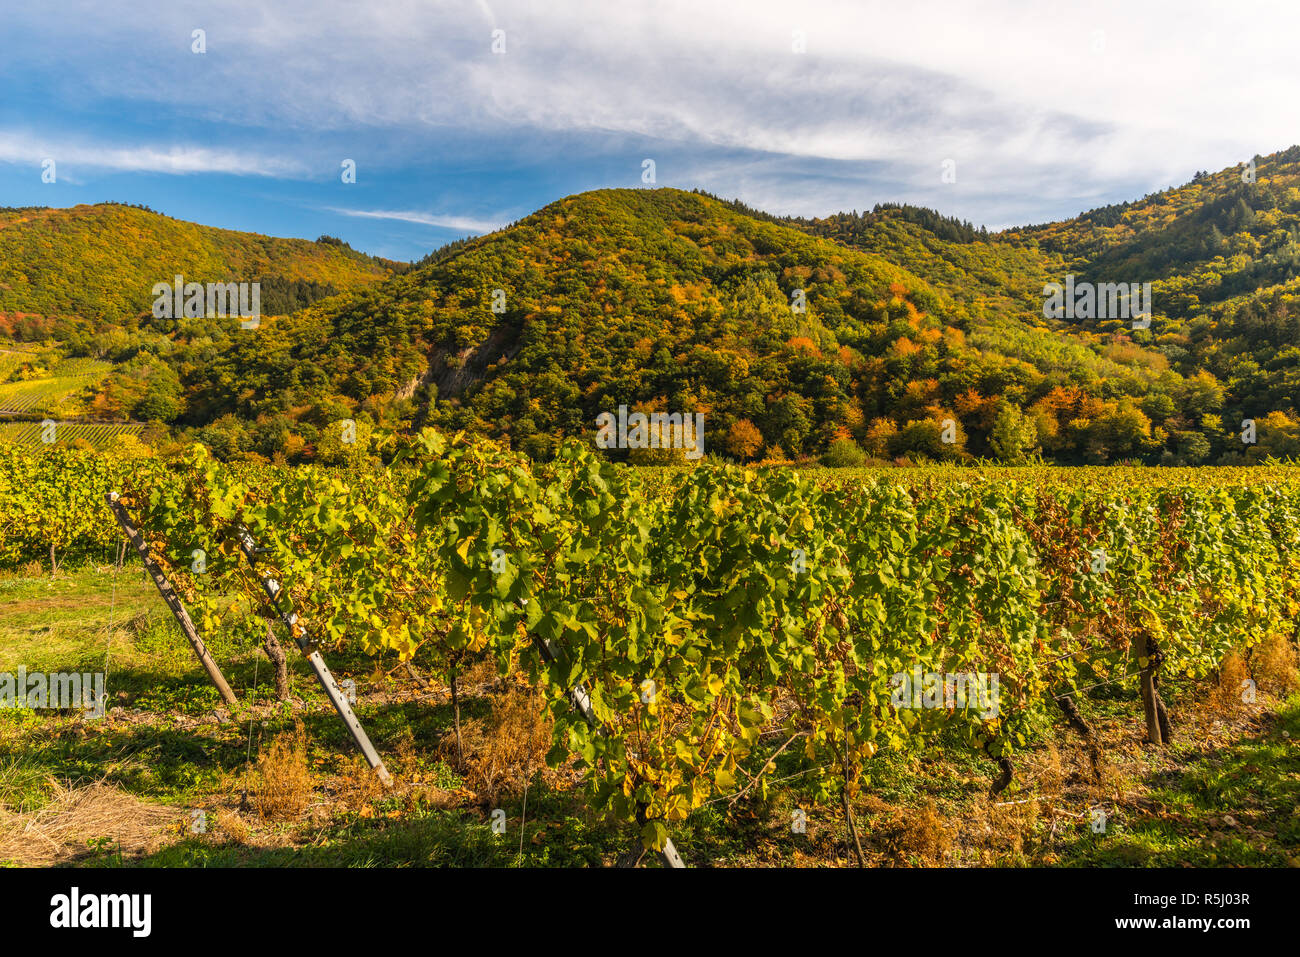 Pölich, landscape with vineyards along the Moselle River and valley near the village of Pölich,  Rhineland-Palatinate, Germany, Europe Stock Photo